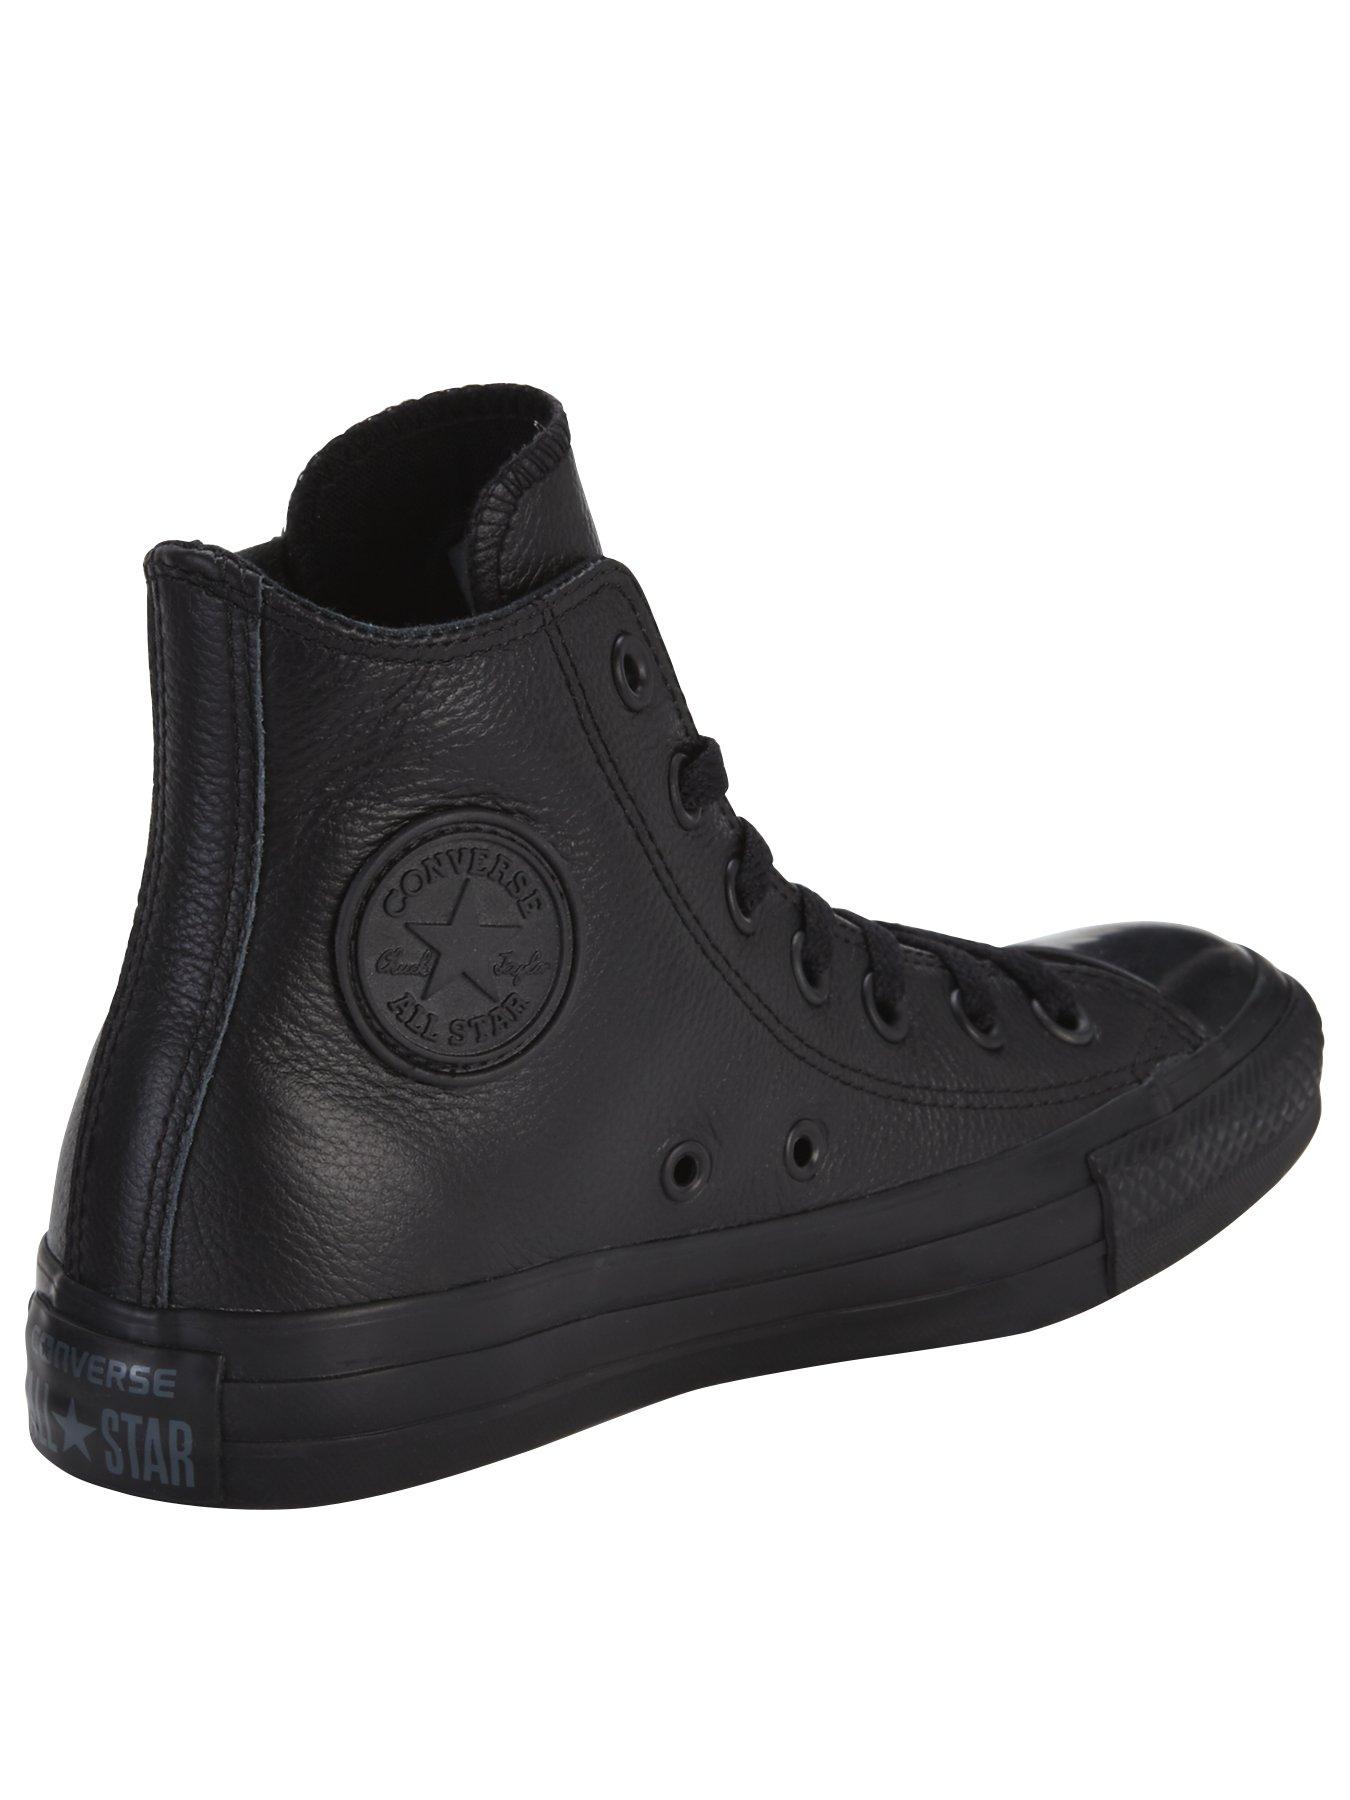 converse leather high top boots